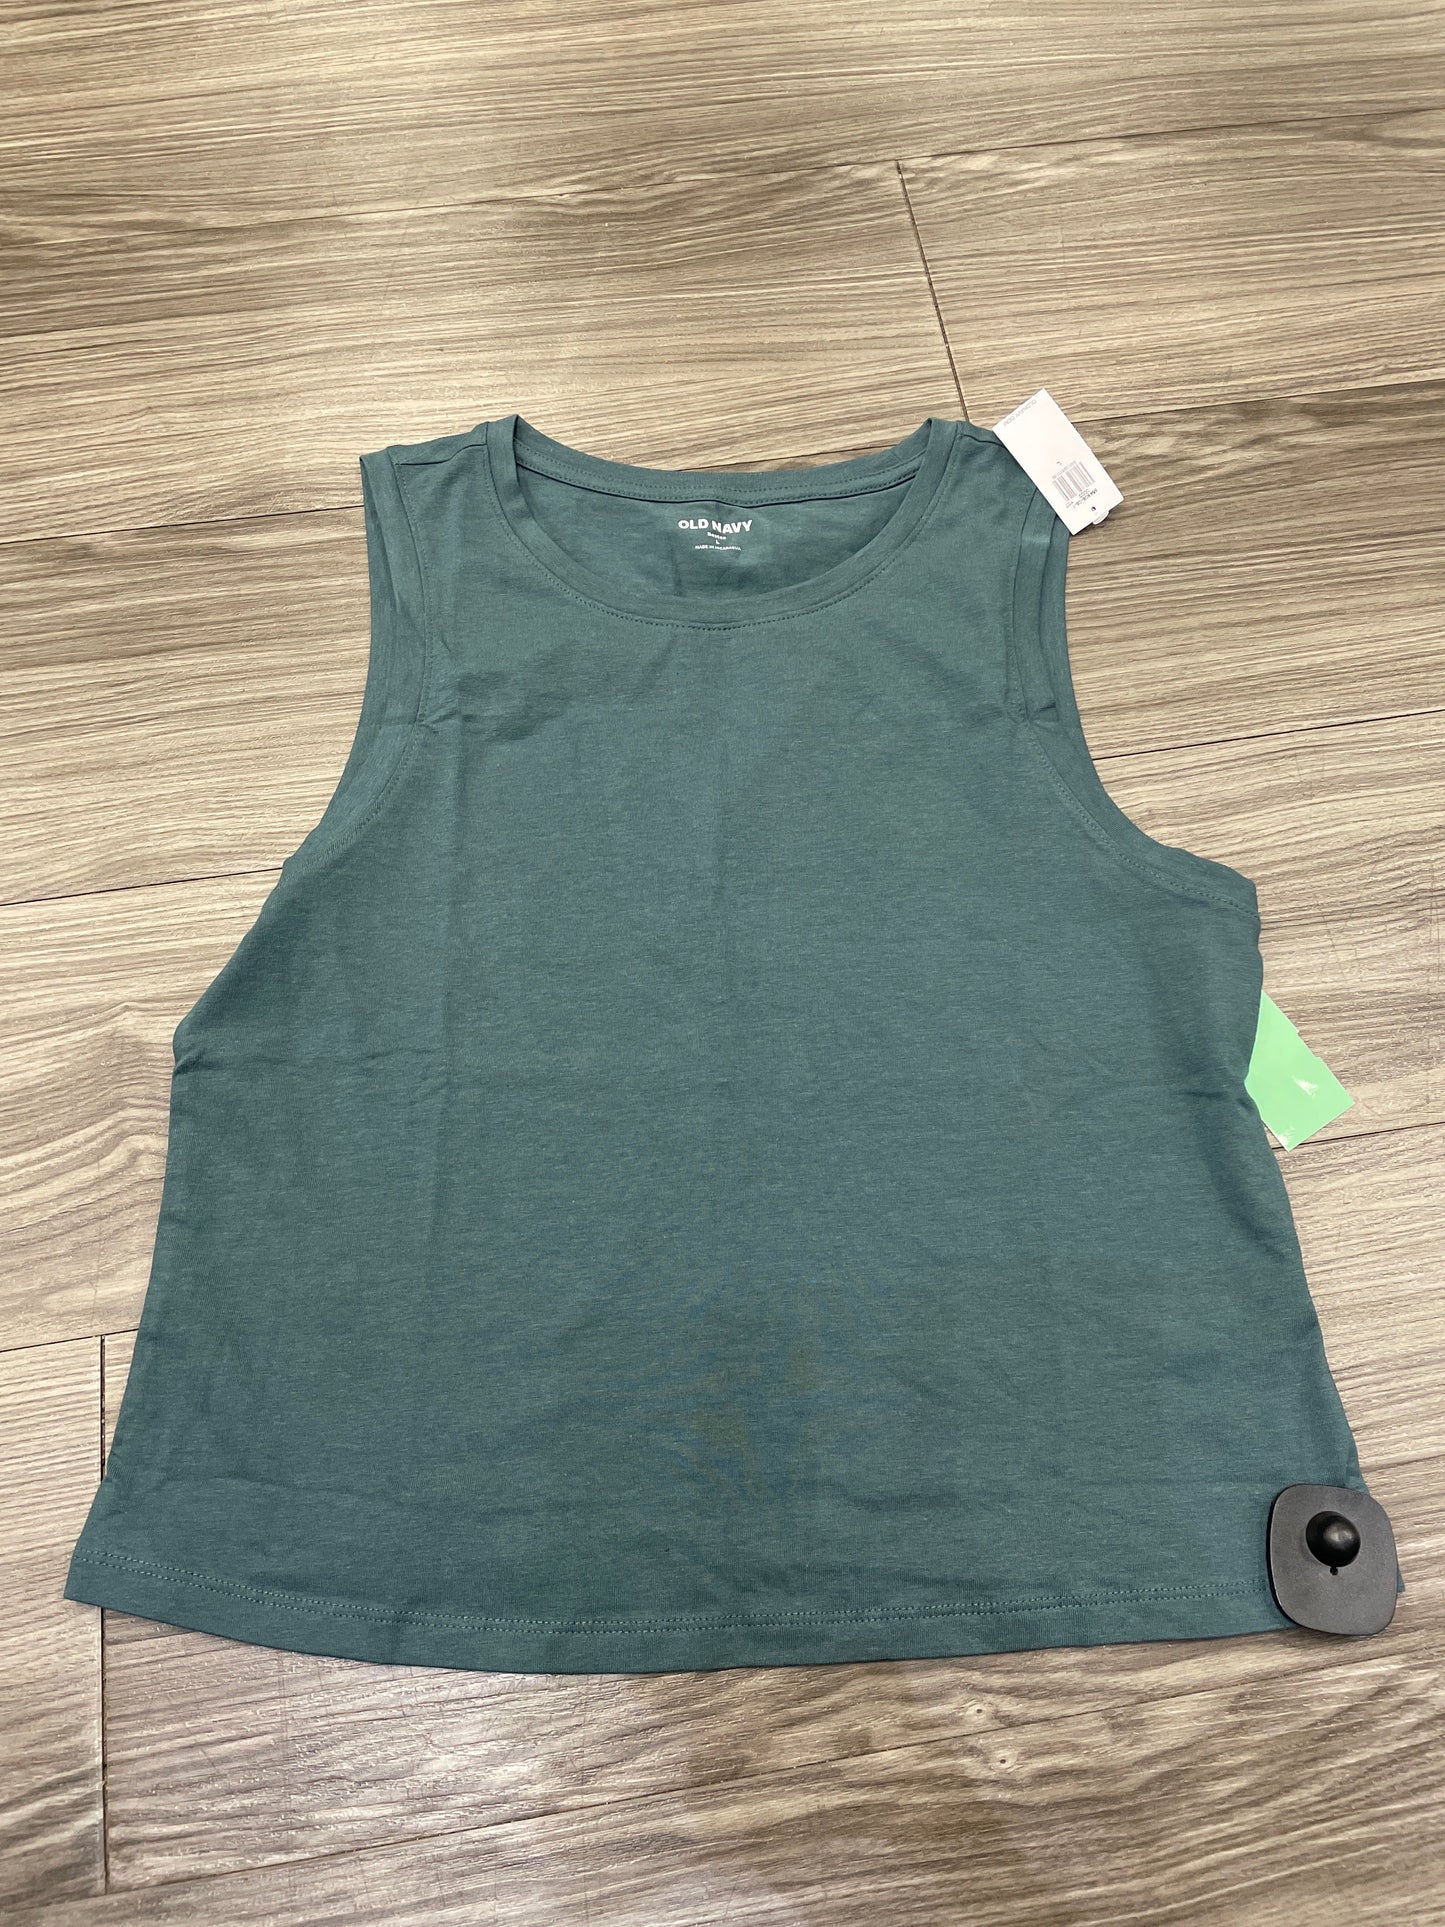 Green Tank Top Old Navy, Size L